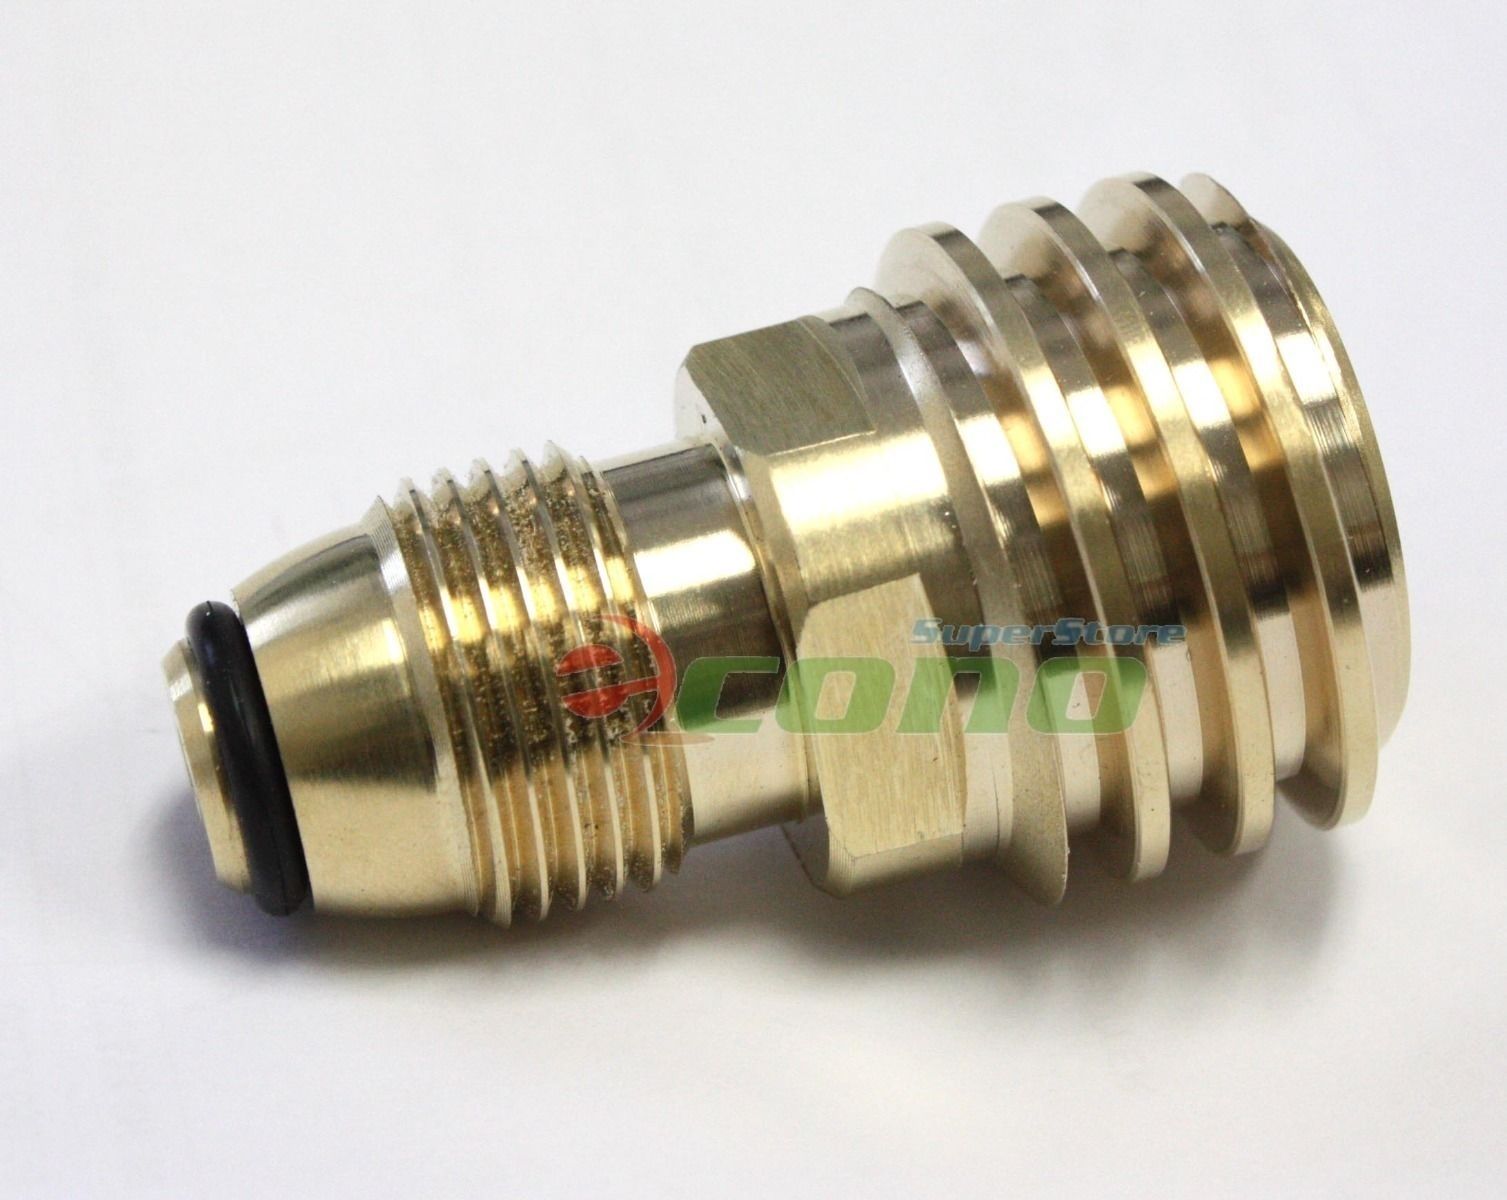 Details about   Converts Propane Service Valve to QCC Outlet Brass H7W4 Refill Adapter NEW V1M5 